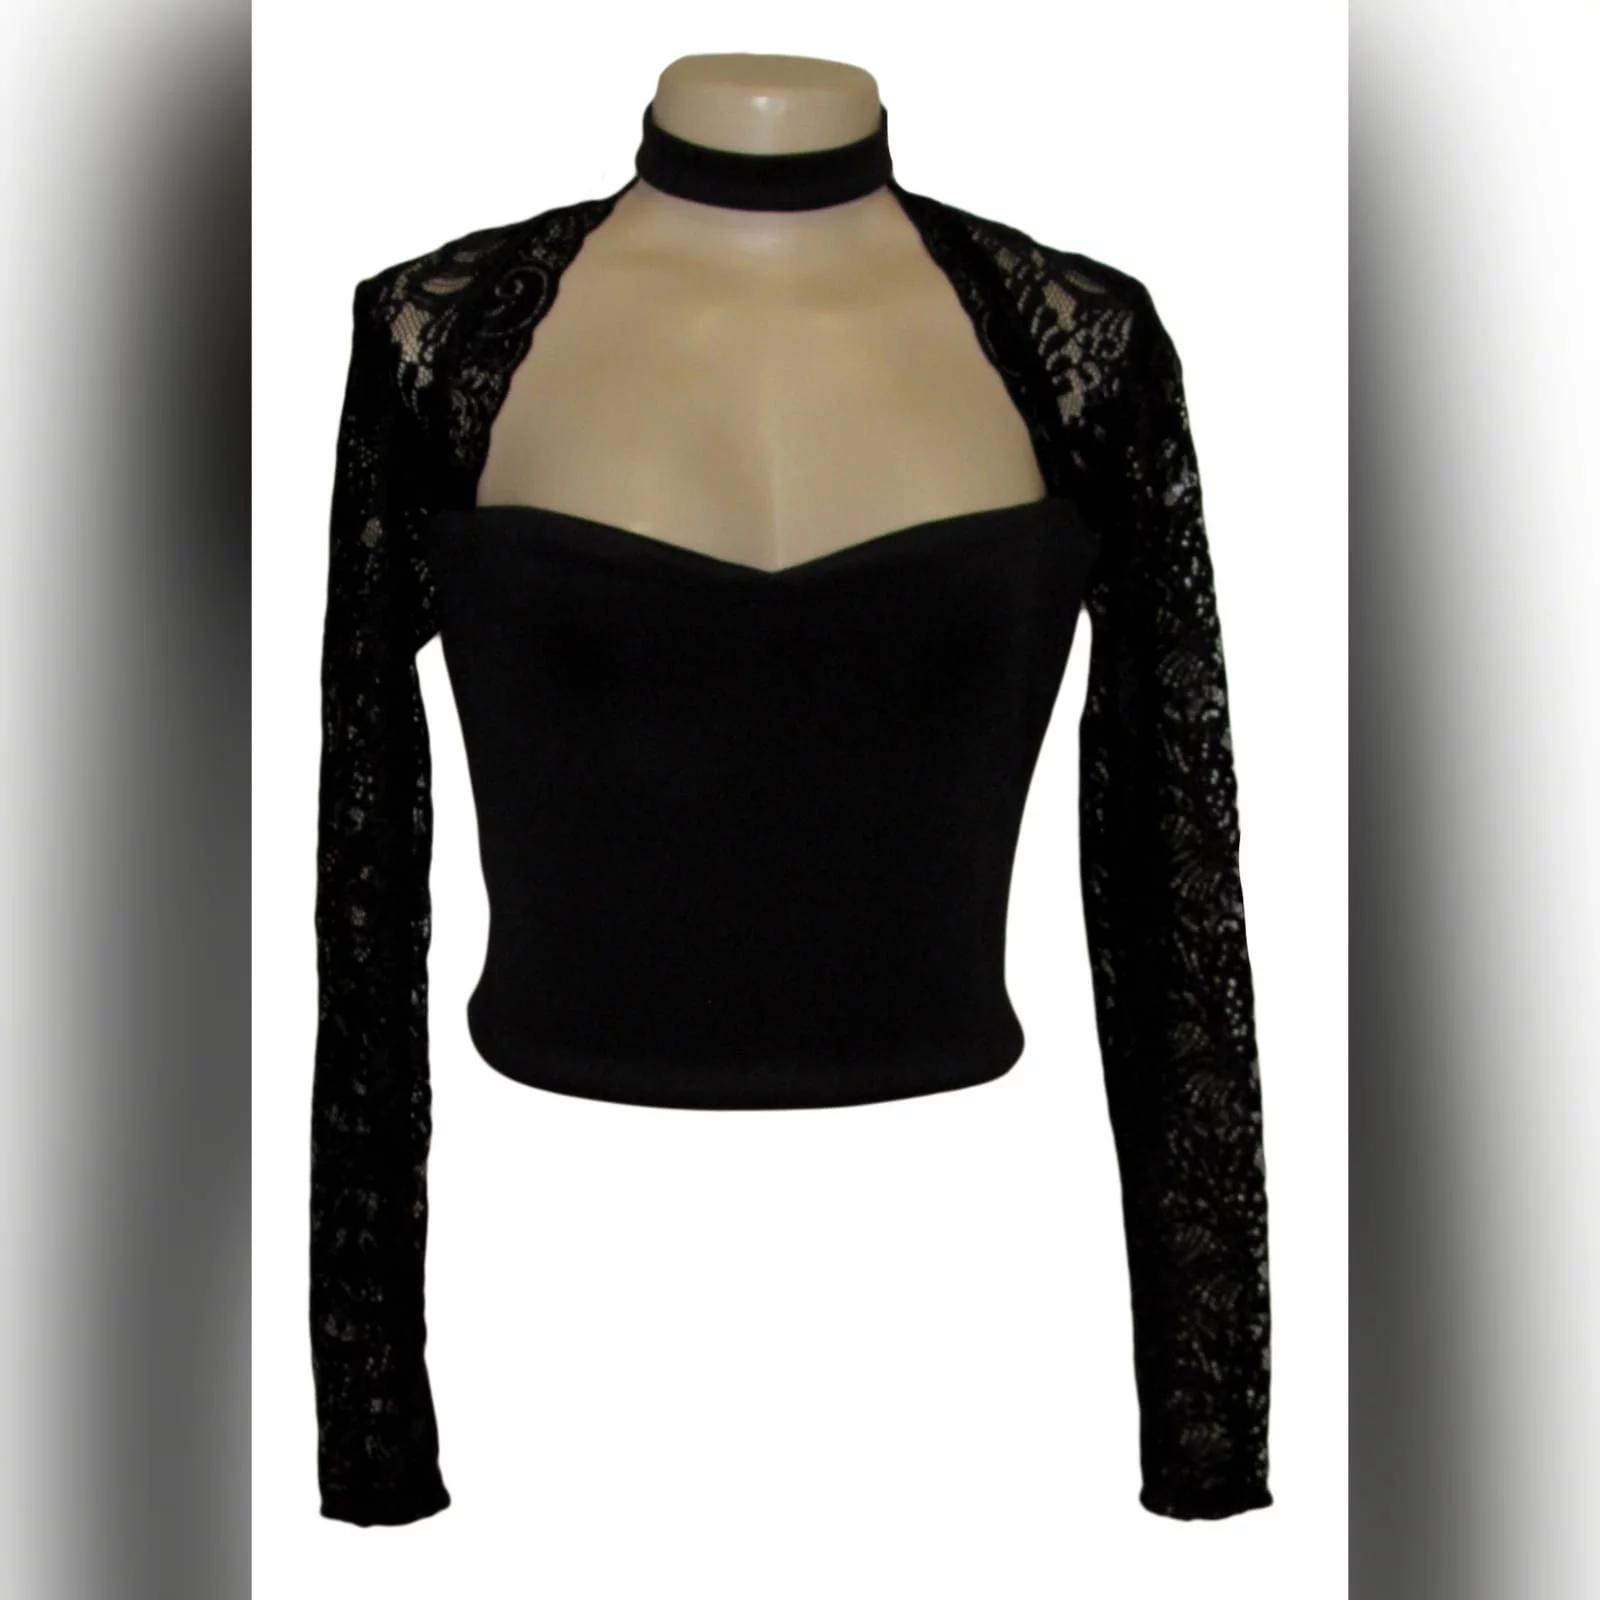 Black choker neckline prom after party crop top 1 black choker neckline matric after party crop top. With shoulders and long lace sleeves